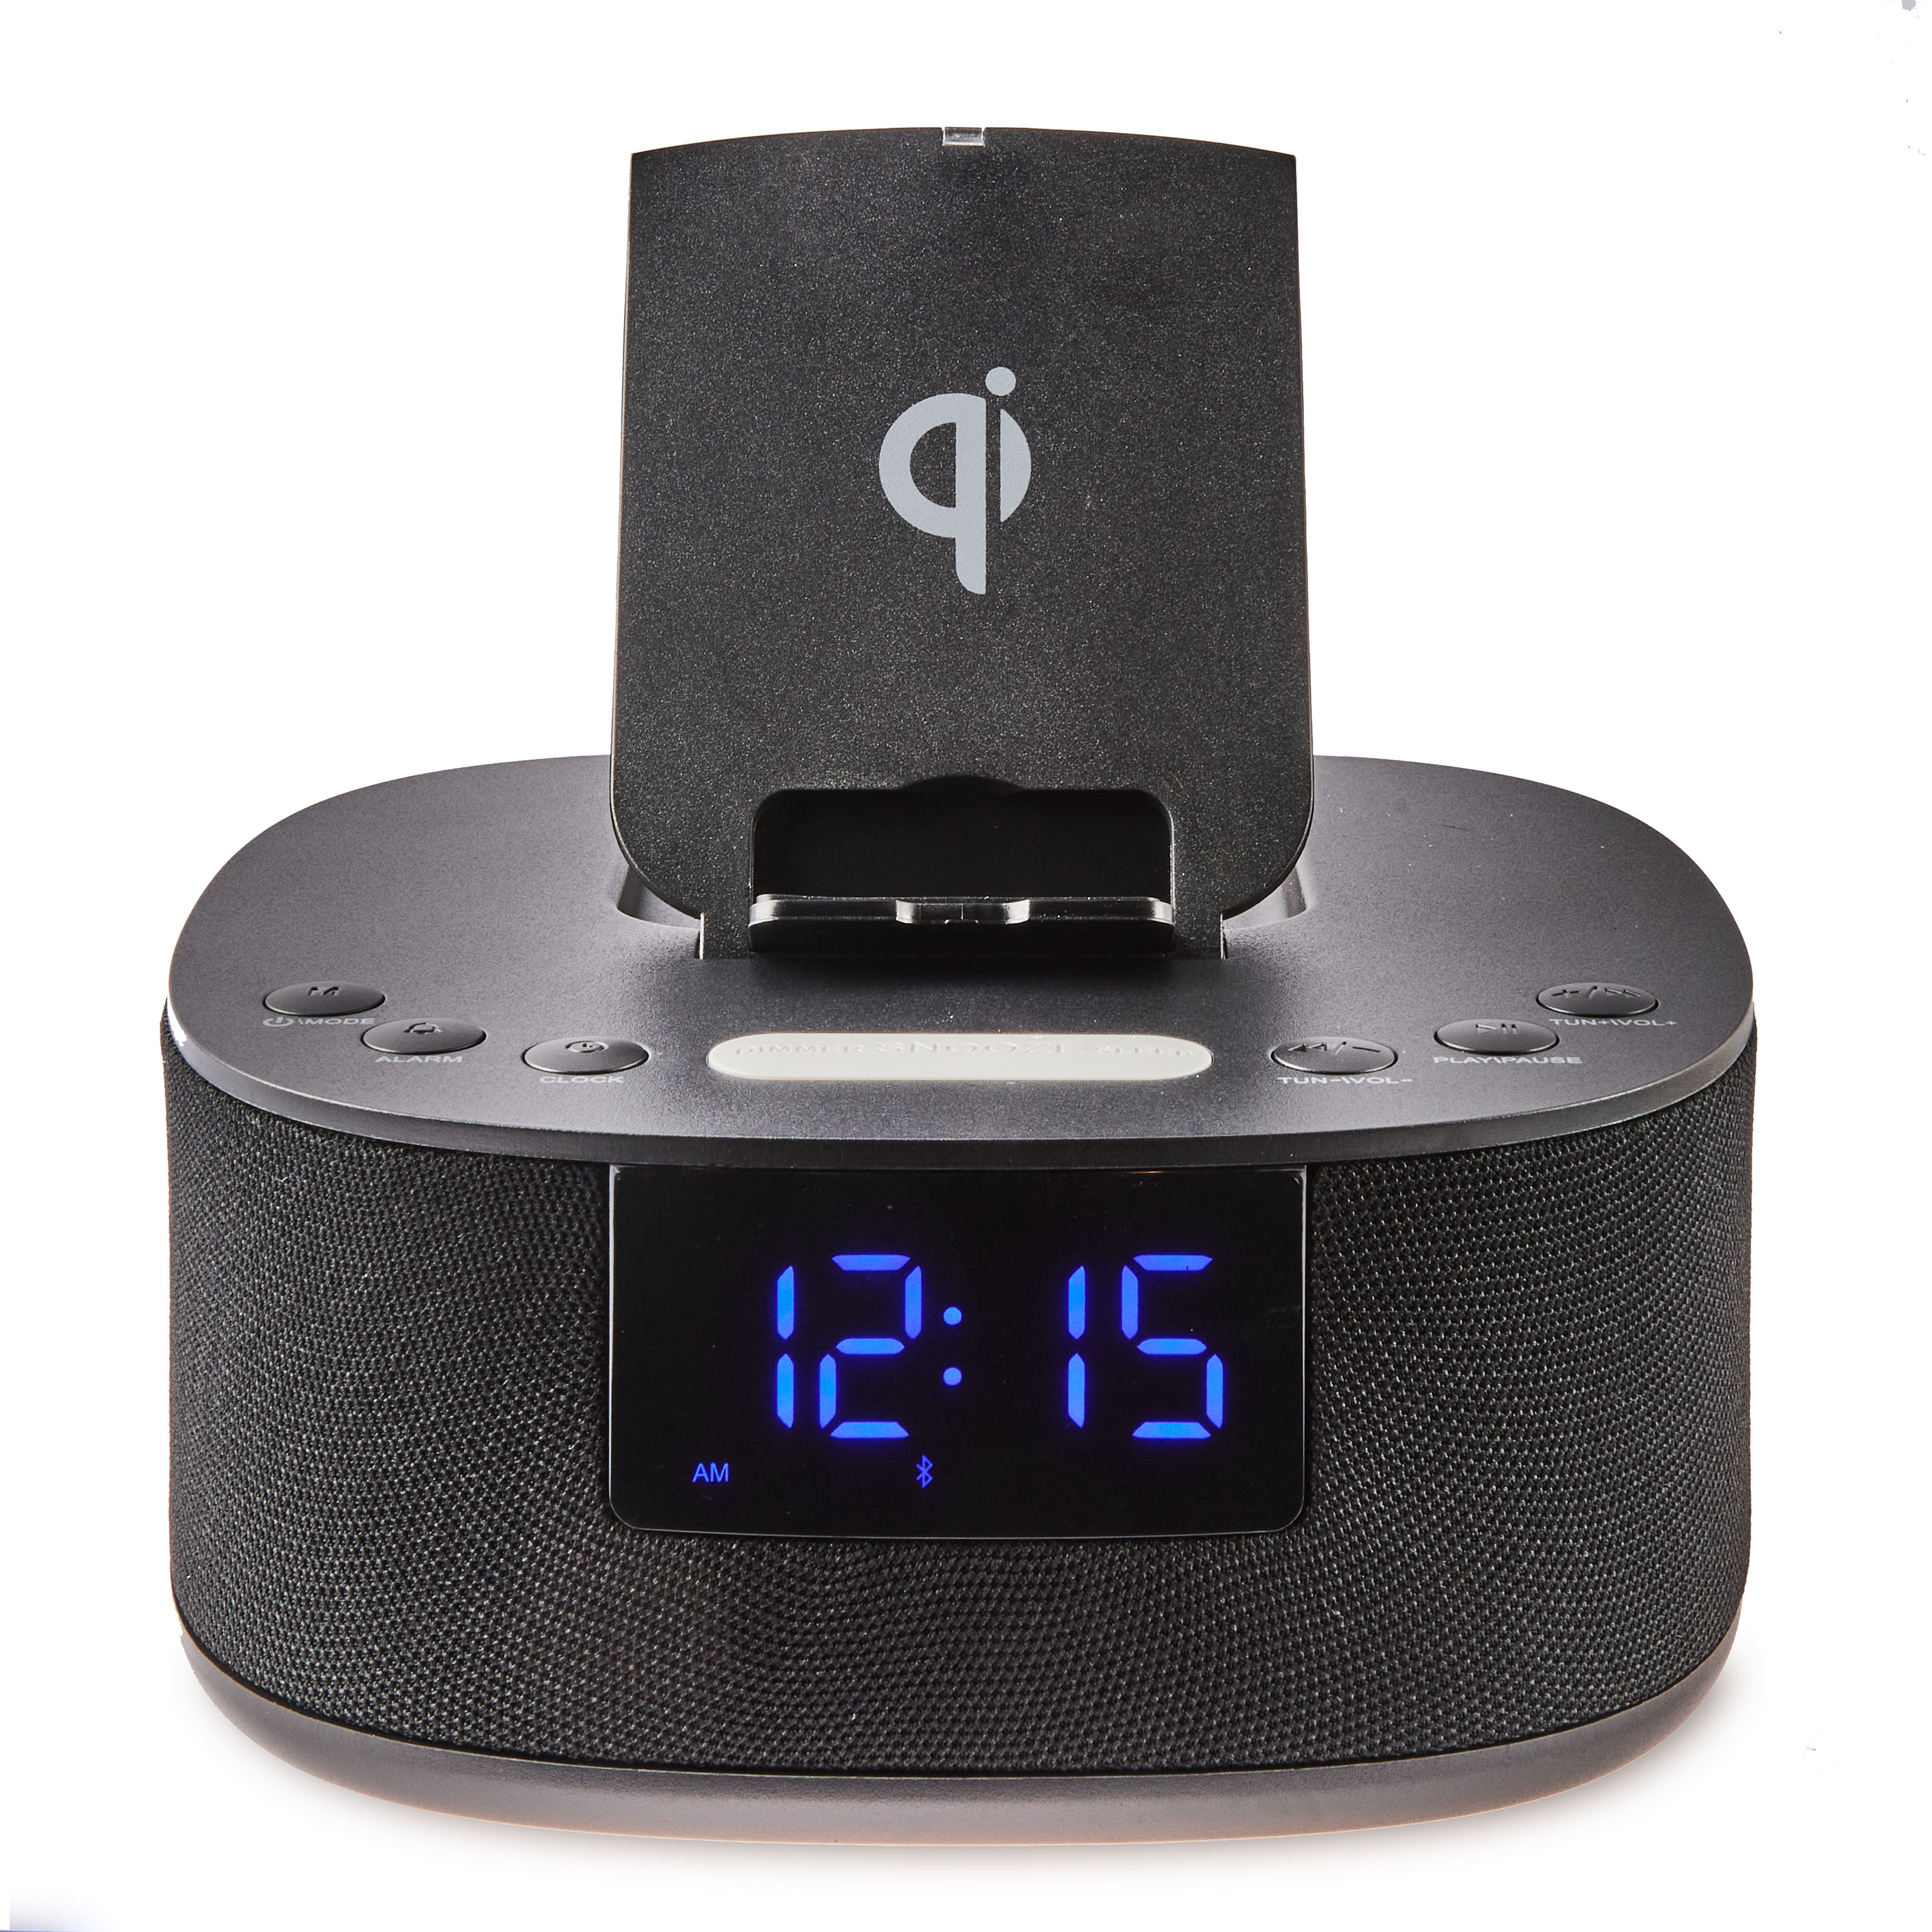 onn. Clock Radio with Wireless Charging and Bluetooth Speaker - image 2 of 5